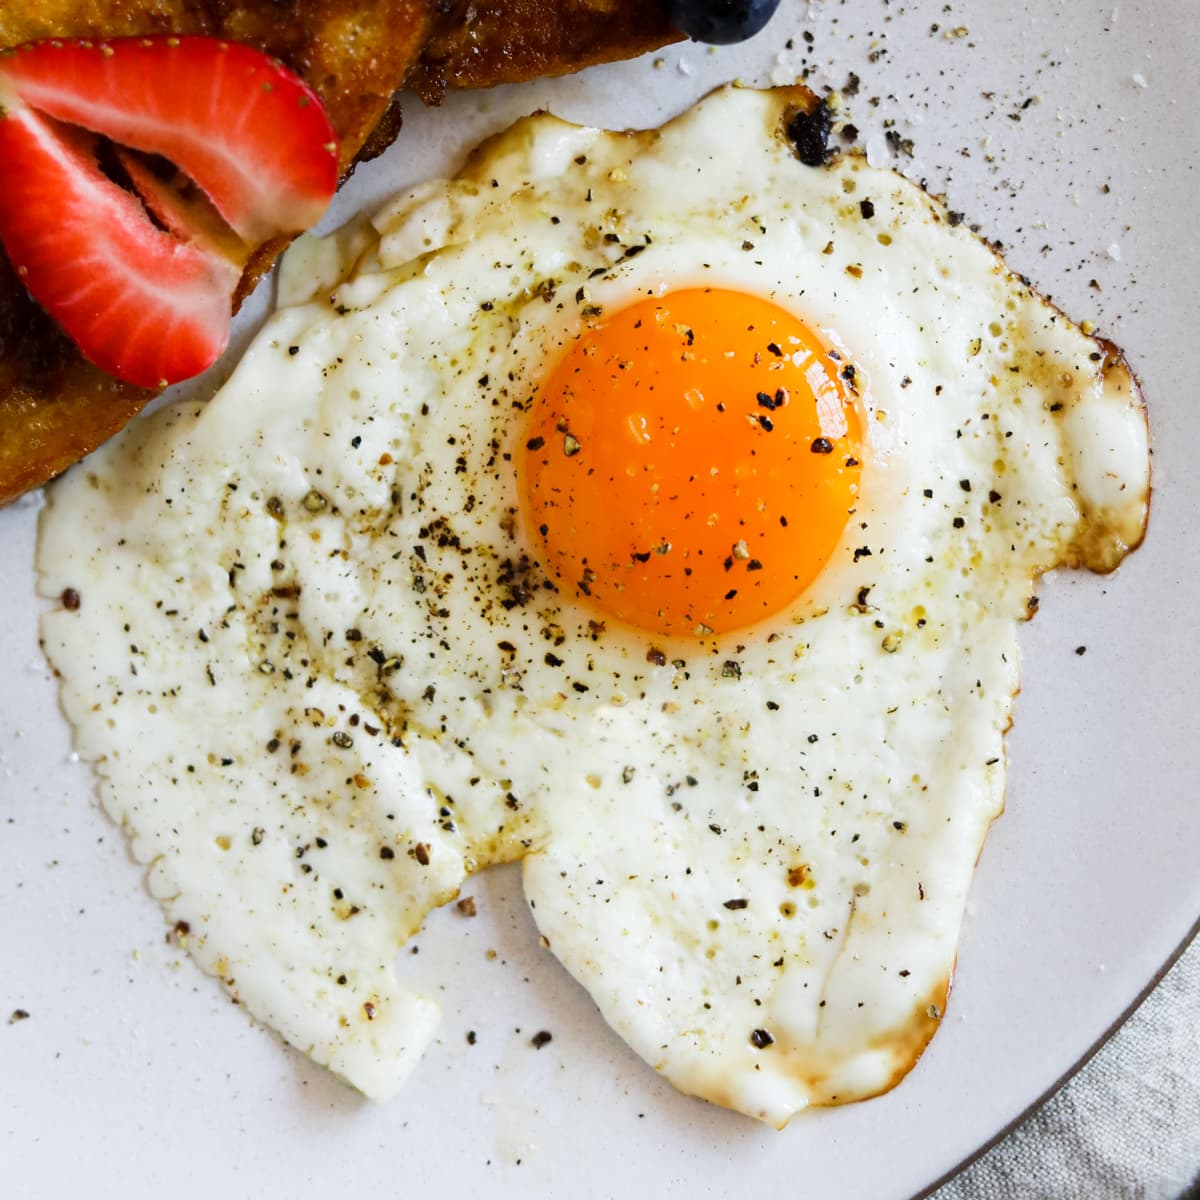 They demonized eggs. They told you the cholesterol and fat were bad for your heart. But it was a lie. Eggs are one of the most powerful superfoods on the planet. Here’s why you should be eating them: